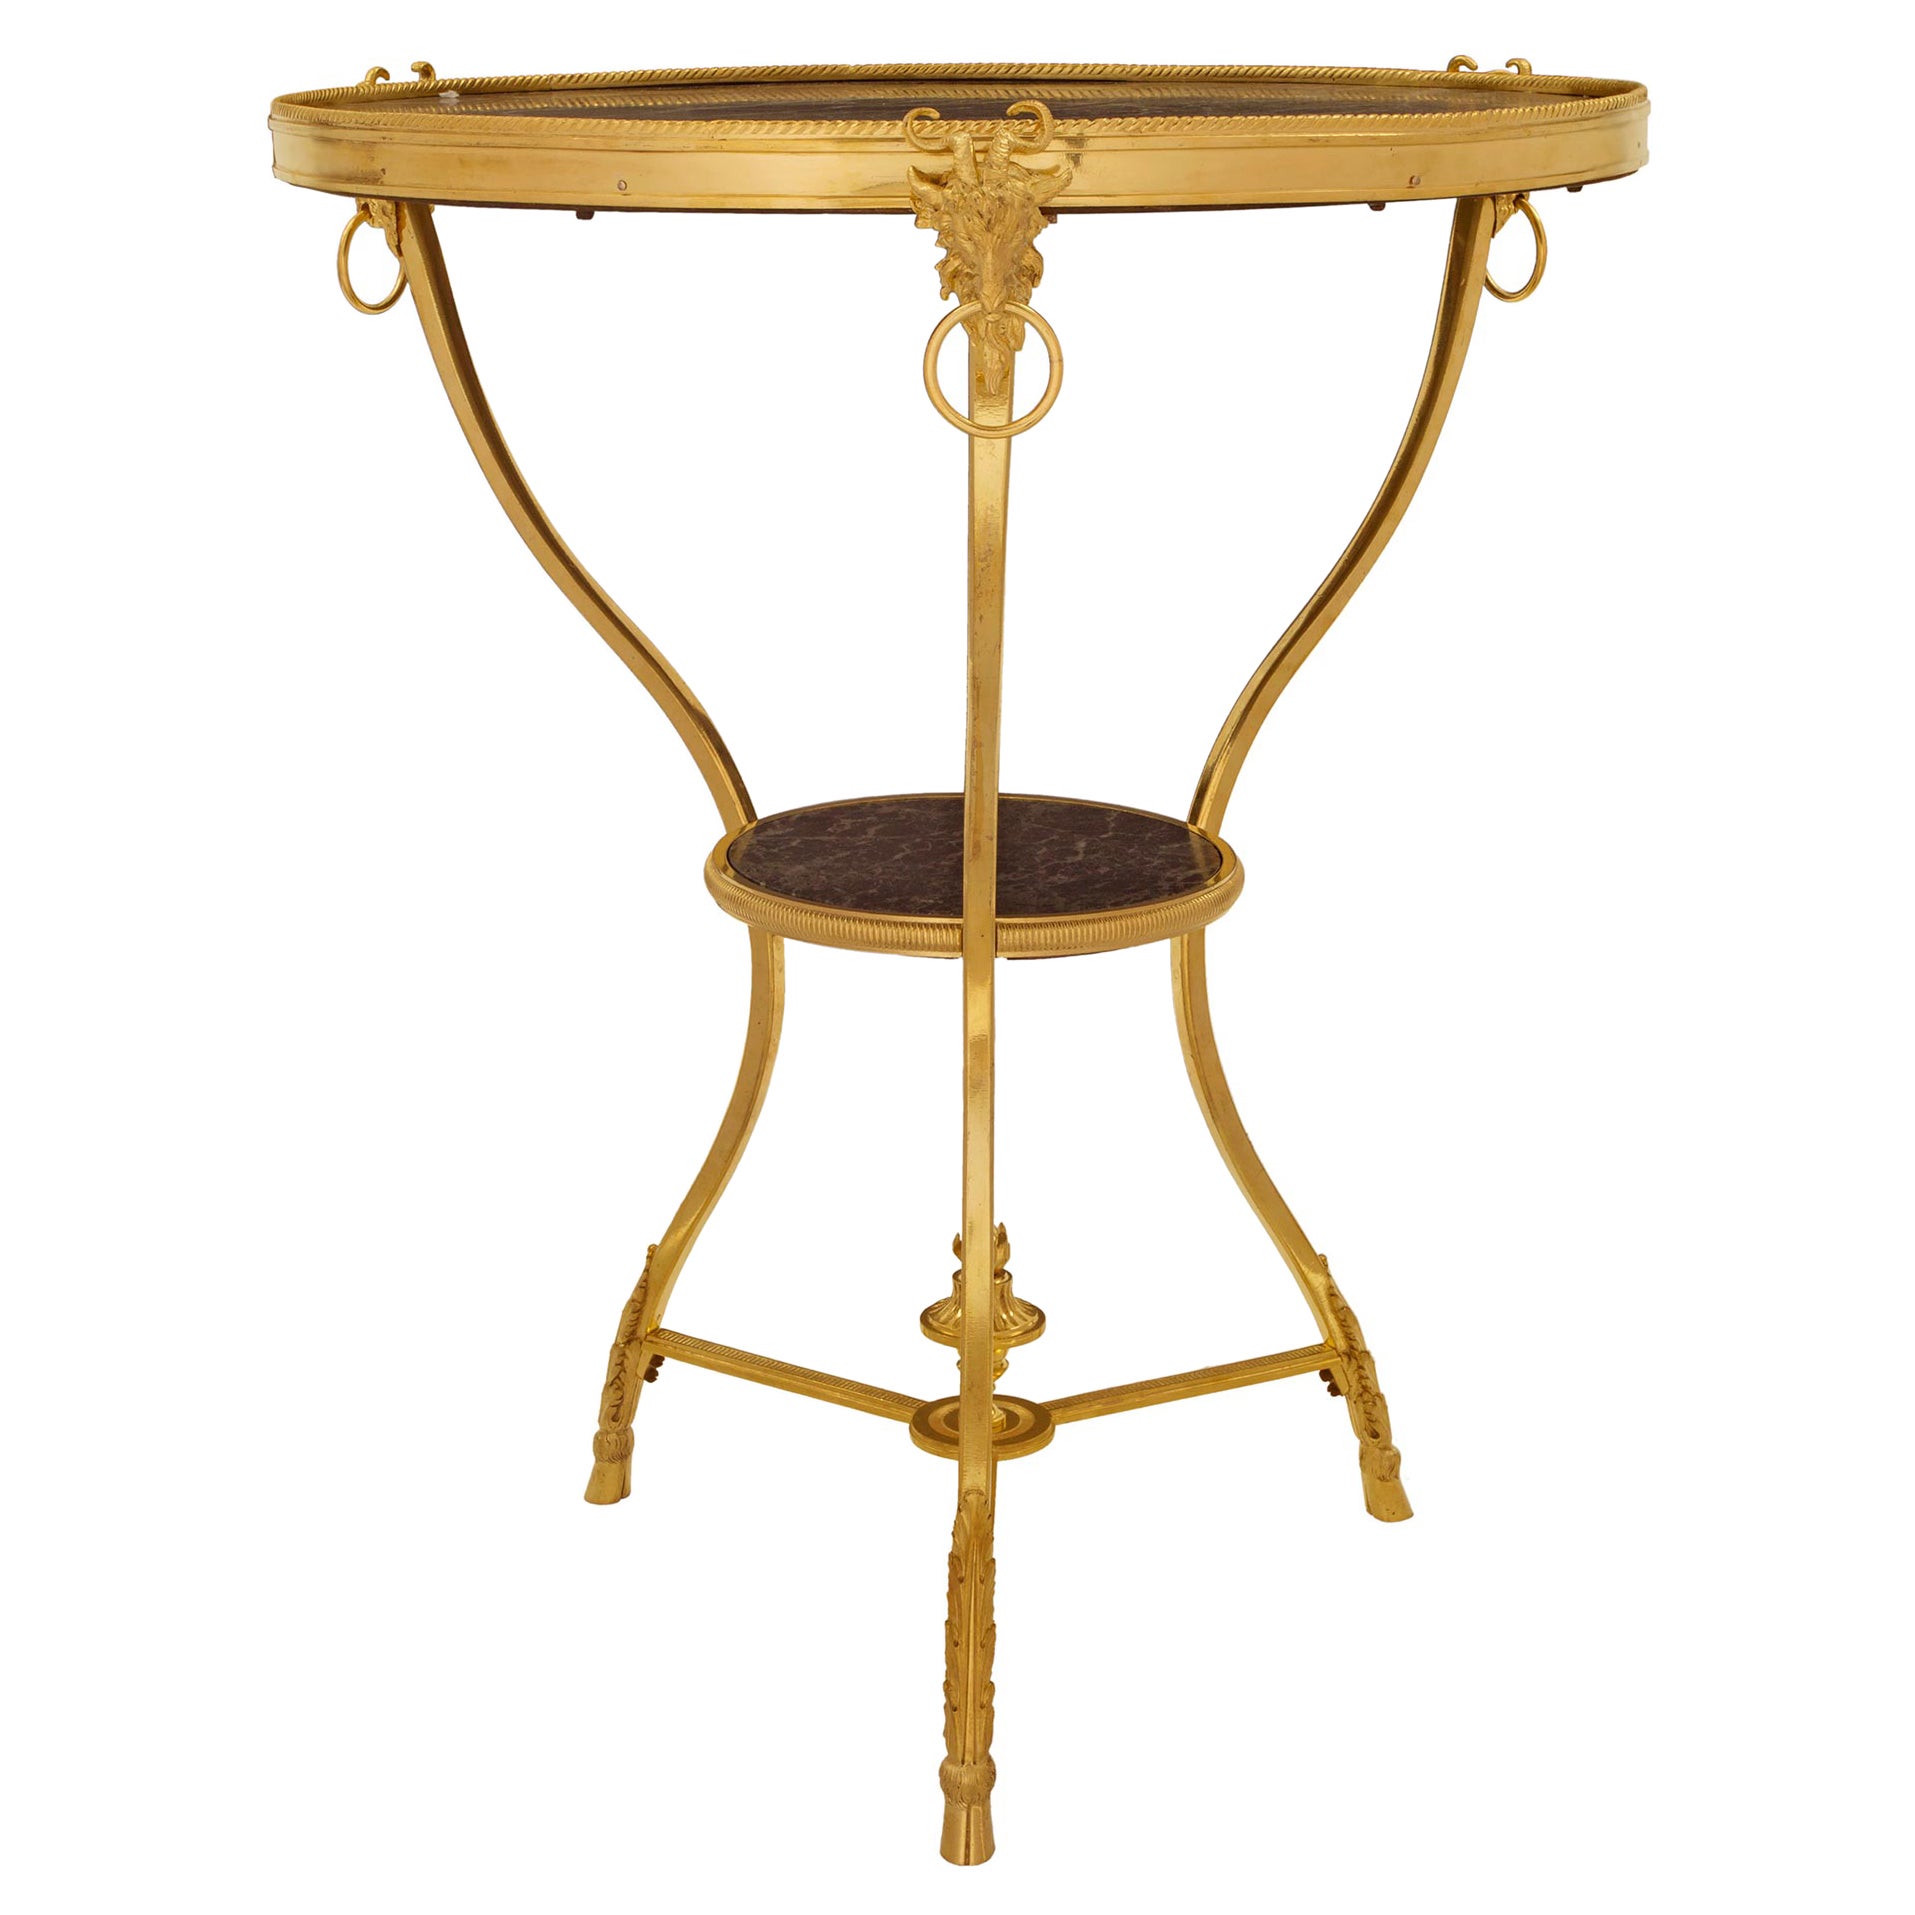 French 19th Century Louis XVI Style Ormolu and Marble Gueridon Side Table